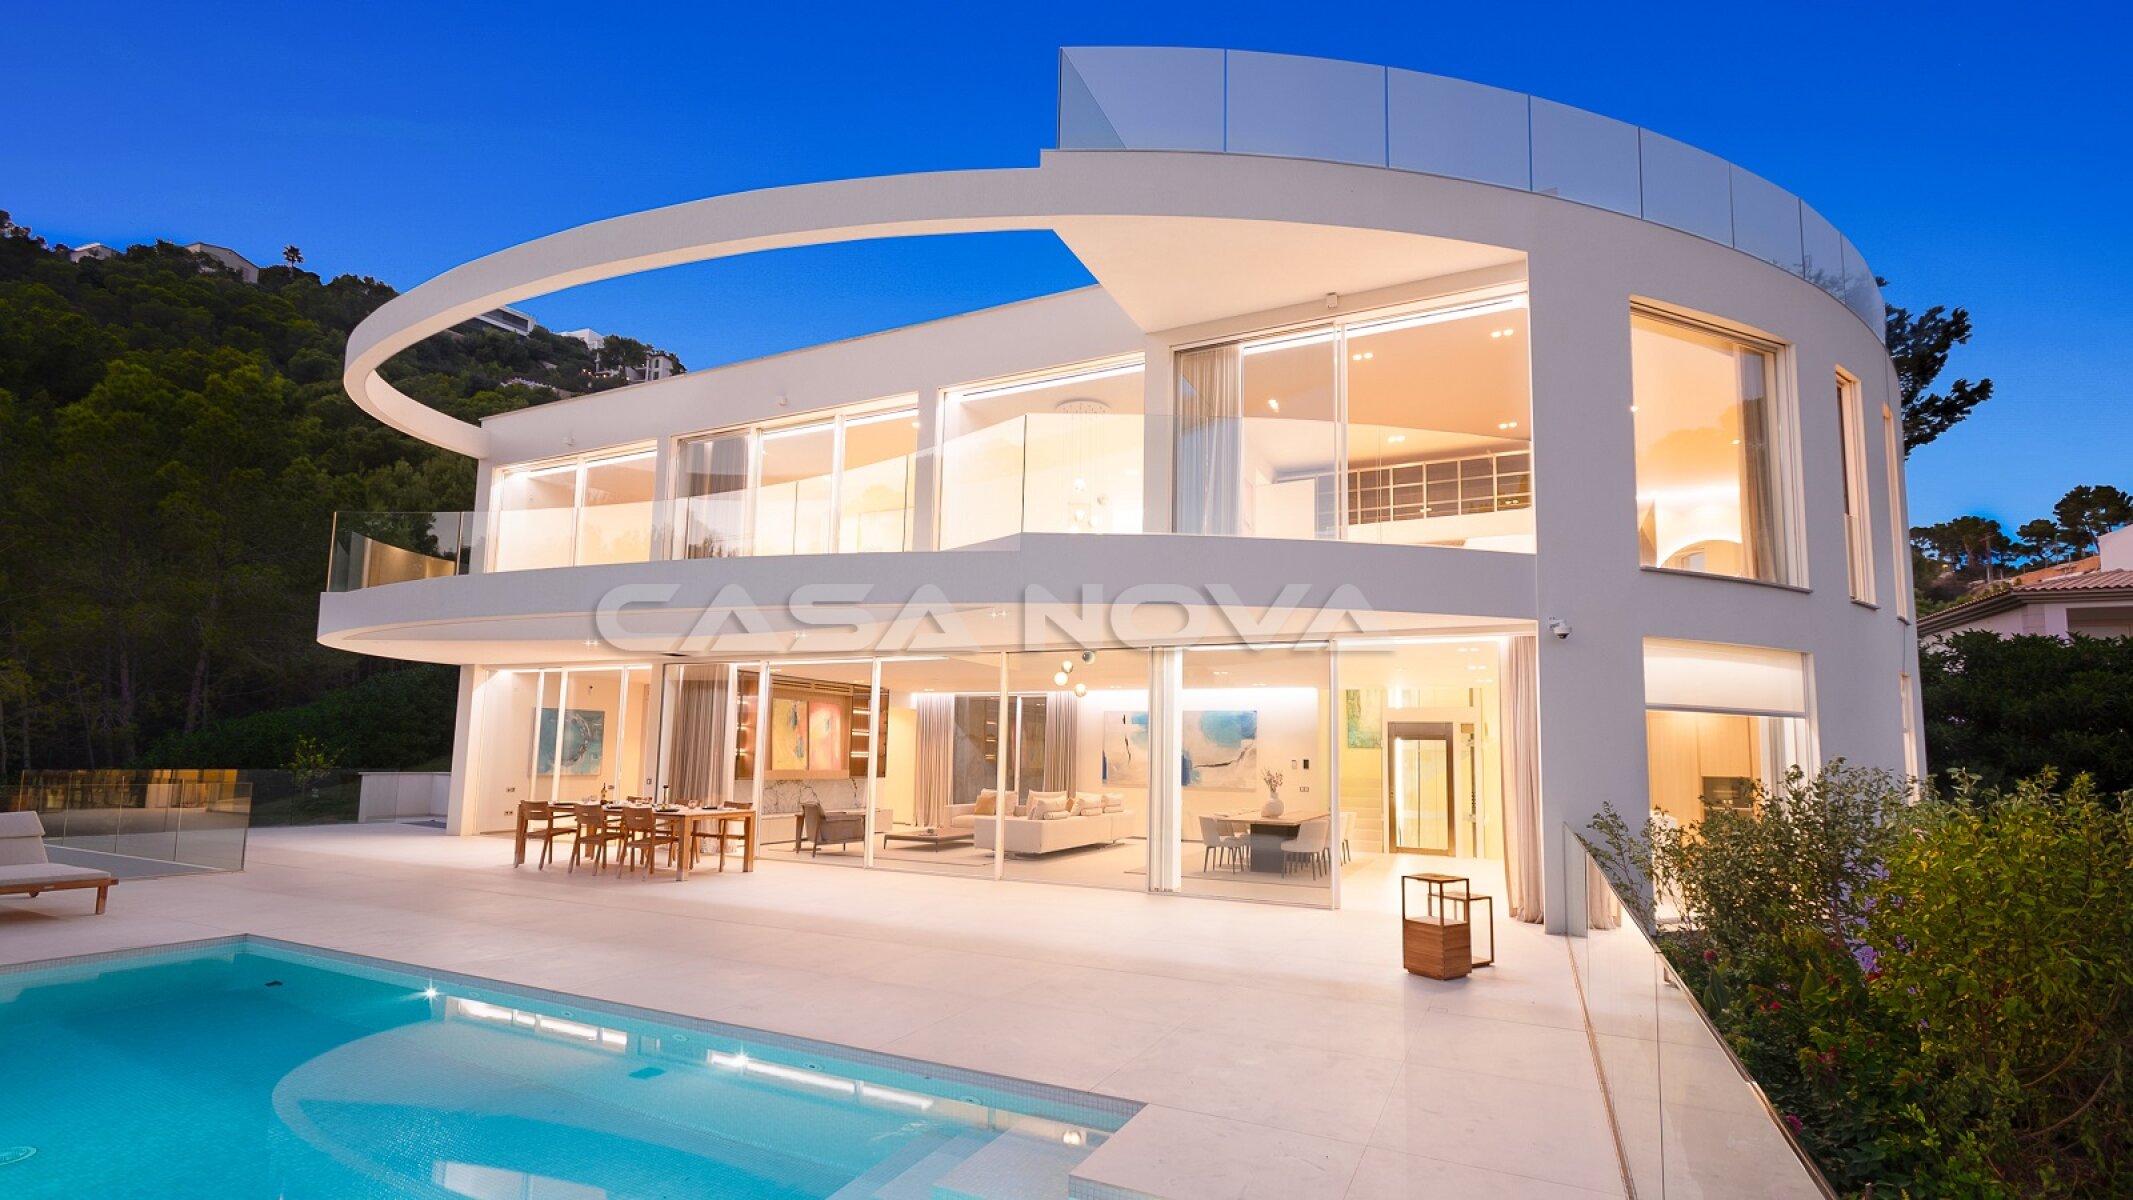 New-build villa with modern and Mediterranean accents